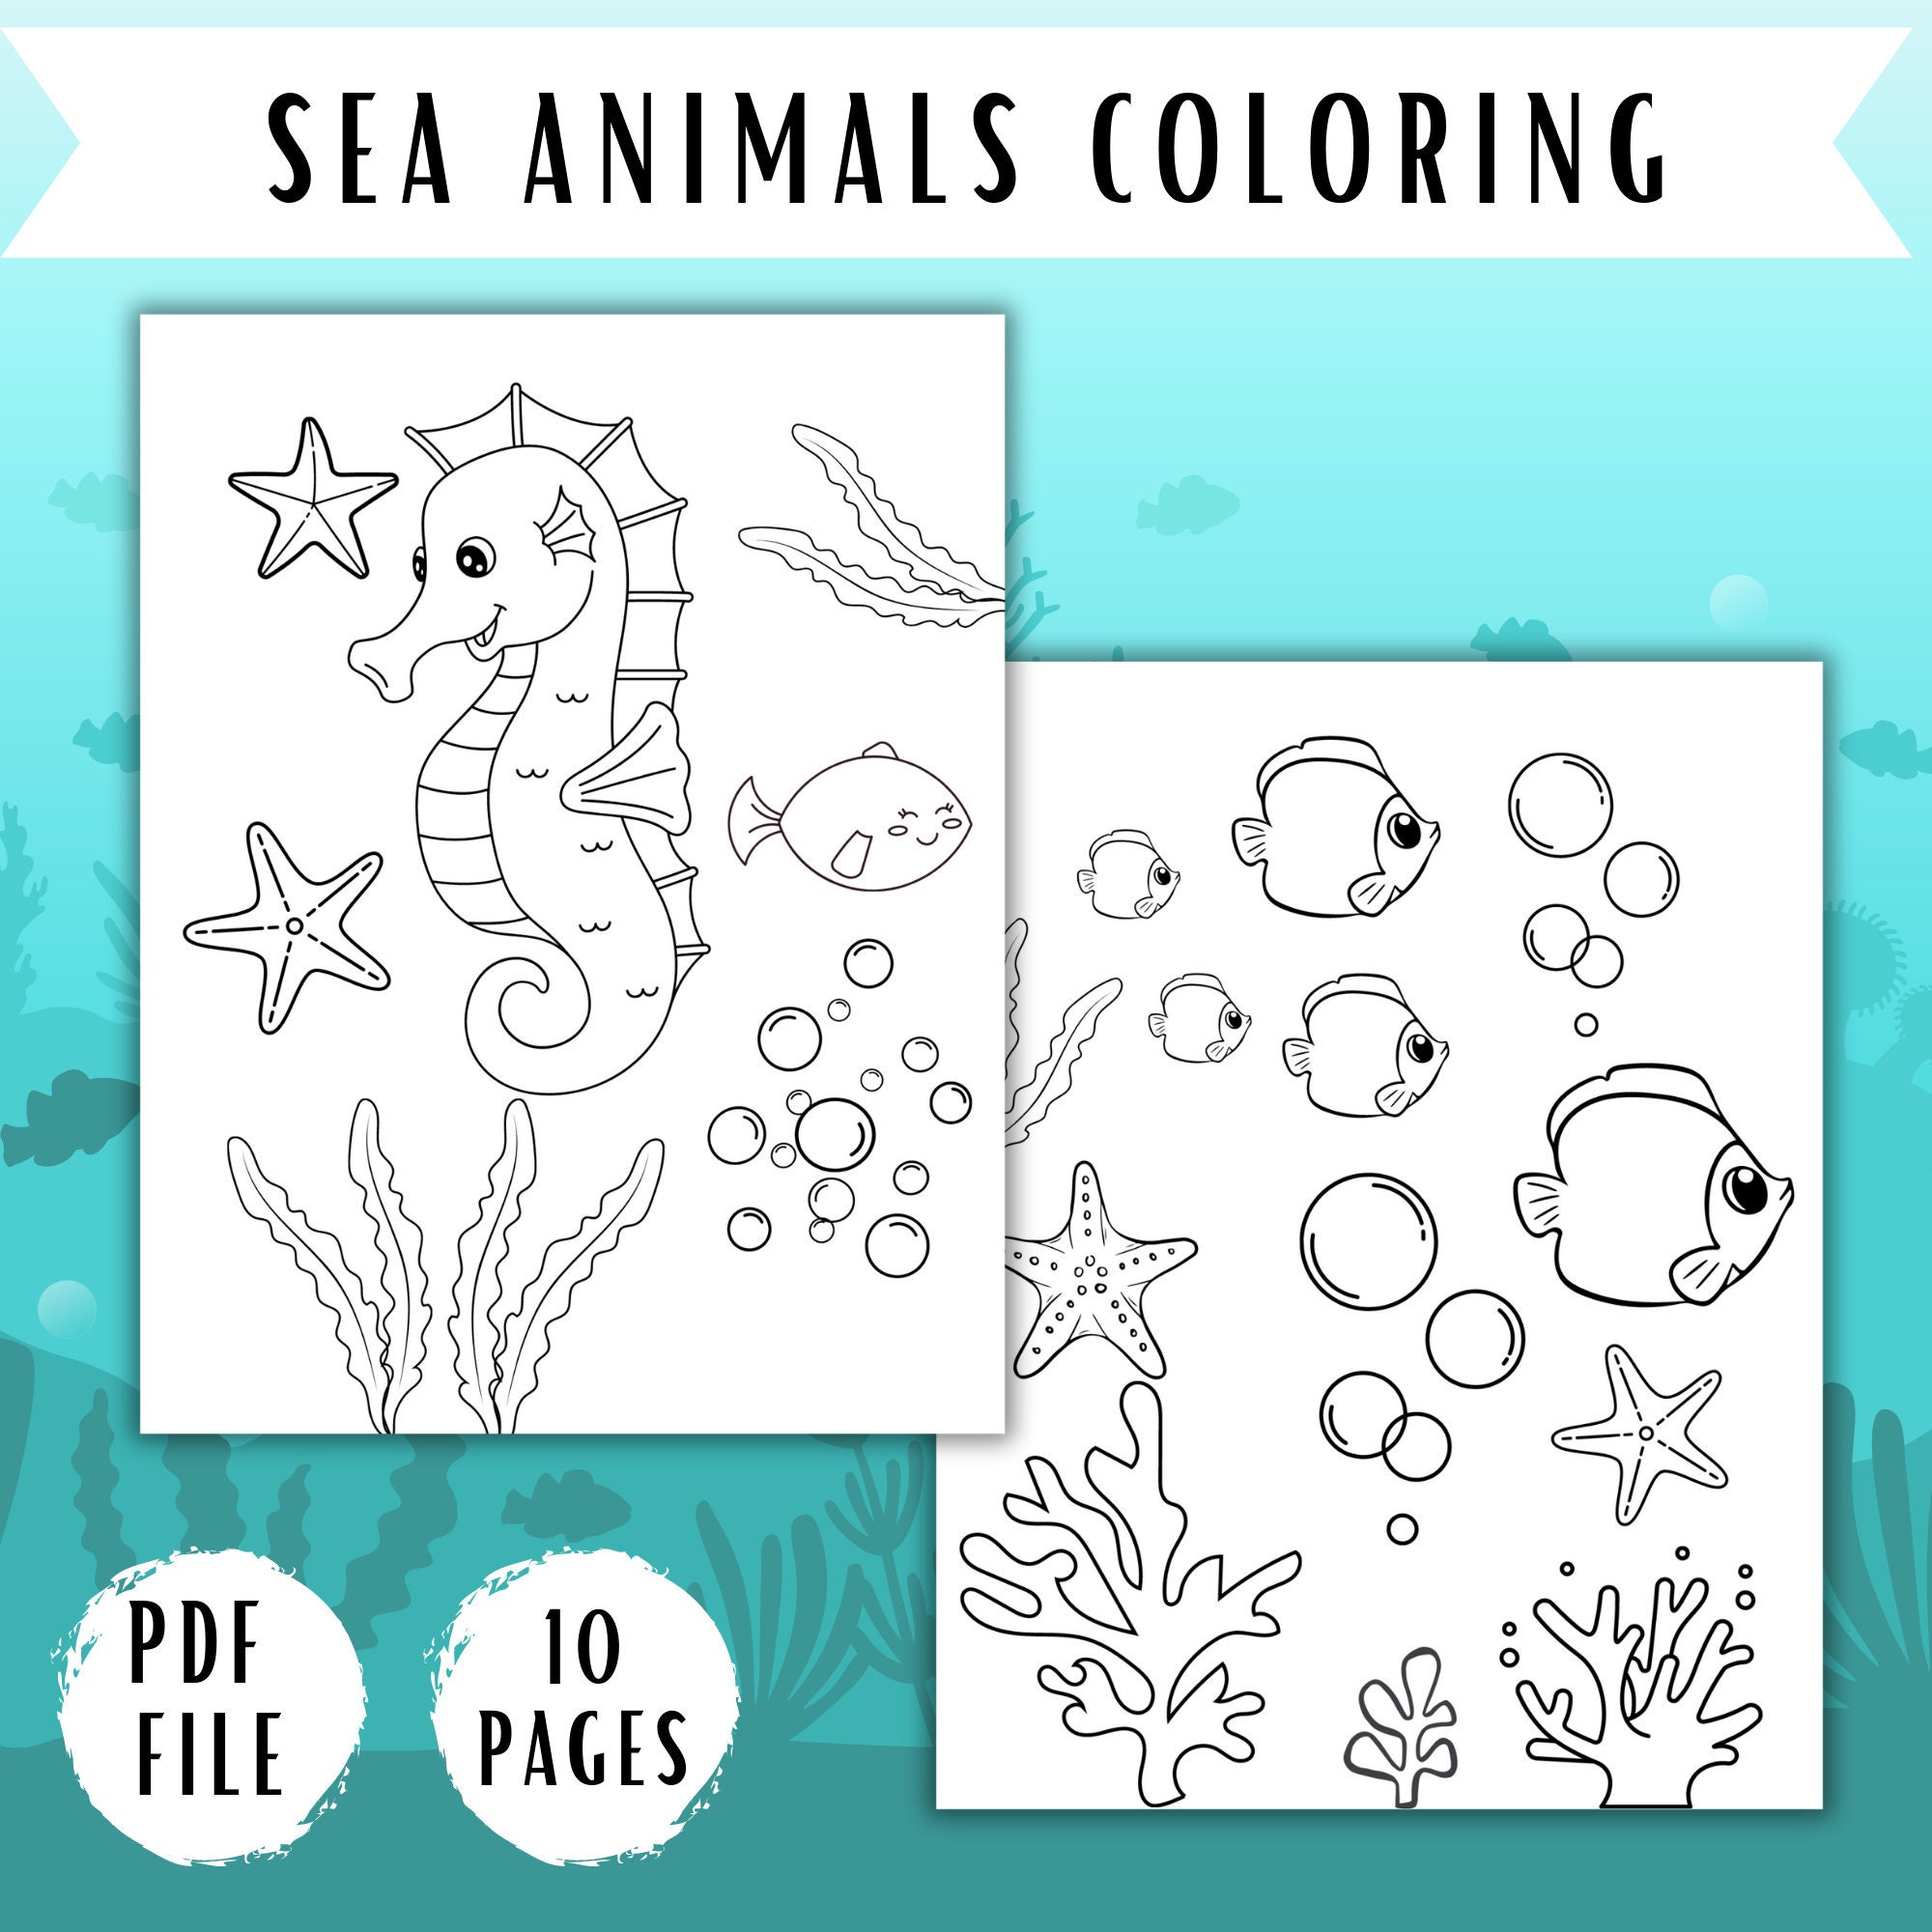 Sea animals coloring pagescute sea animalcoloring page for